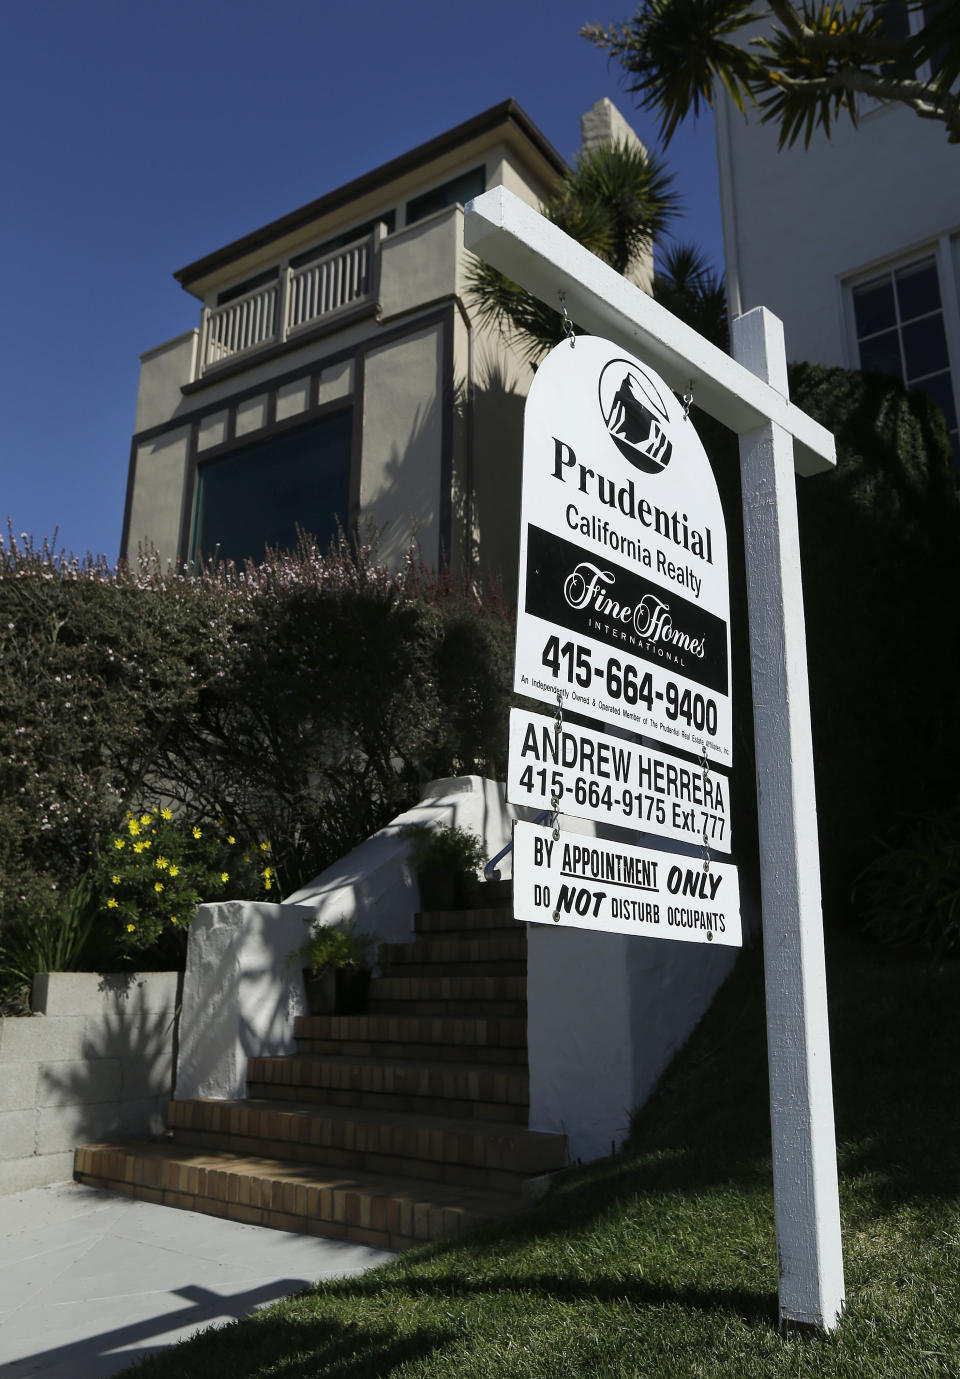 A realtor sign is shown in front of a home for sale in San Francisco, Monday, March 17, 2014. San Francisco will now lend as much as $200,000 to some homebuyers toward a down payment on their first house or condominium. Mayor Ed Lee's decision to double the previous limit of $100,000 was intended to help middle-class residents who have been hit hard by the housing crunch. (AP Photo/Jeff Chiu)